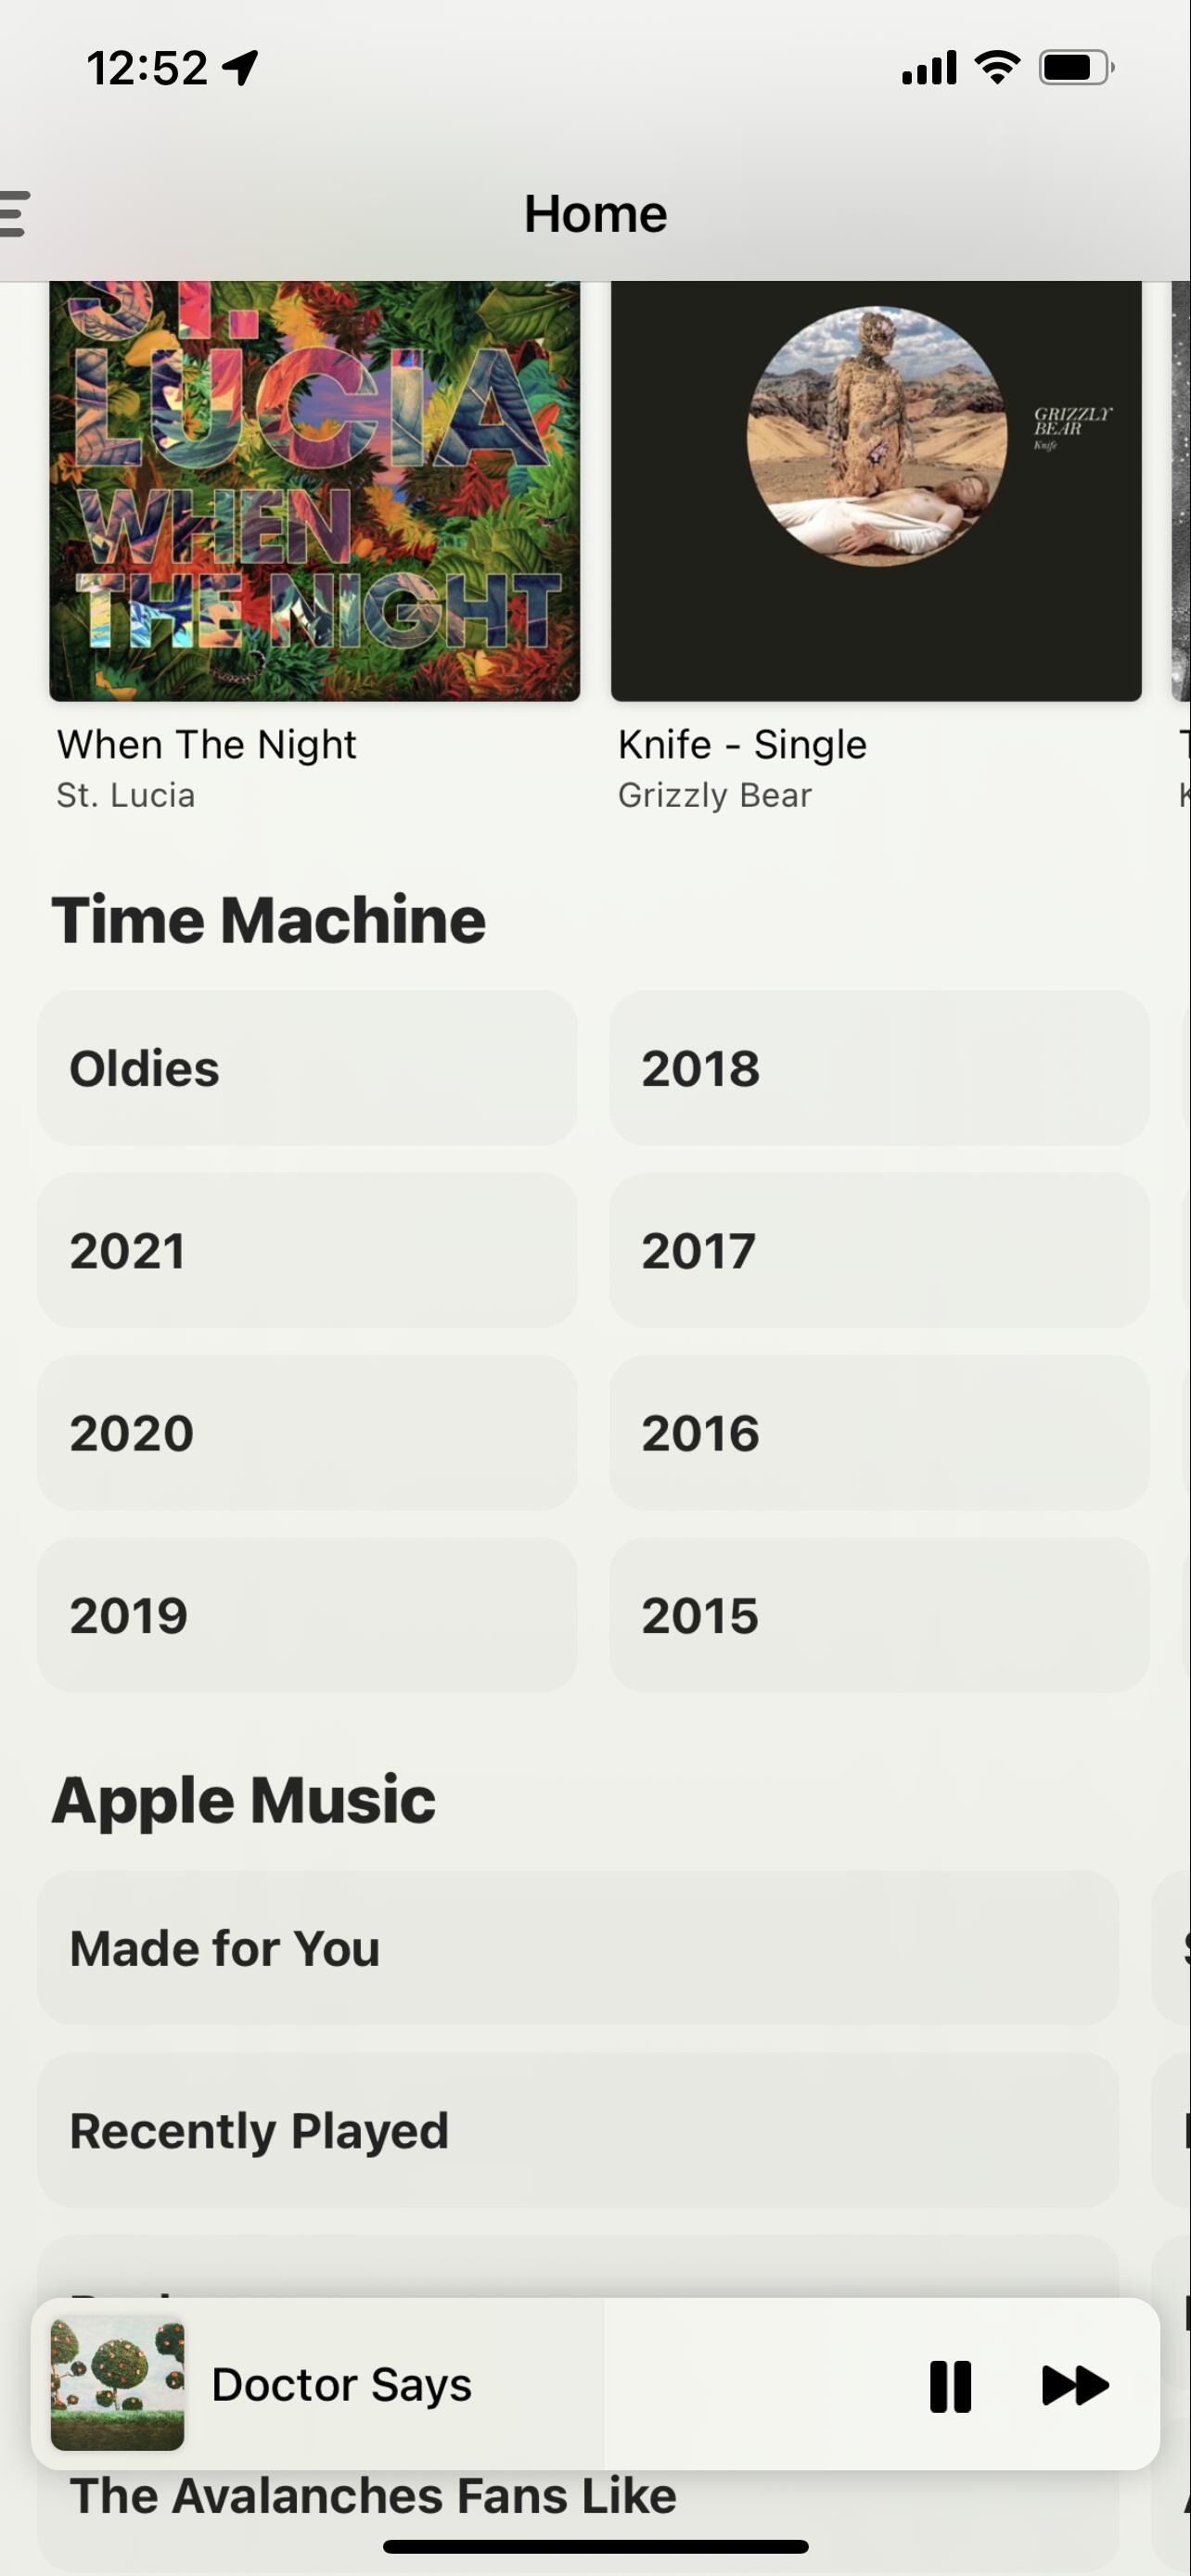 Image of my Home page Time Machine section in light mode